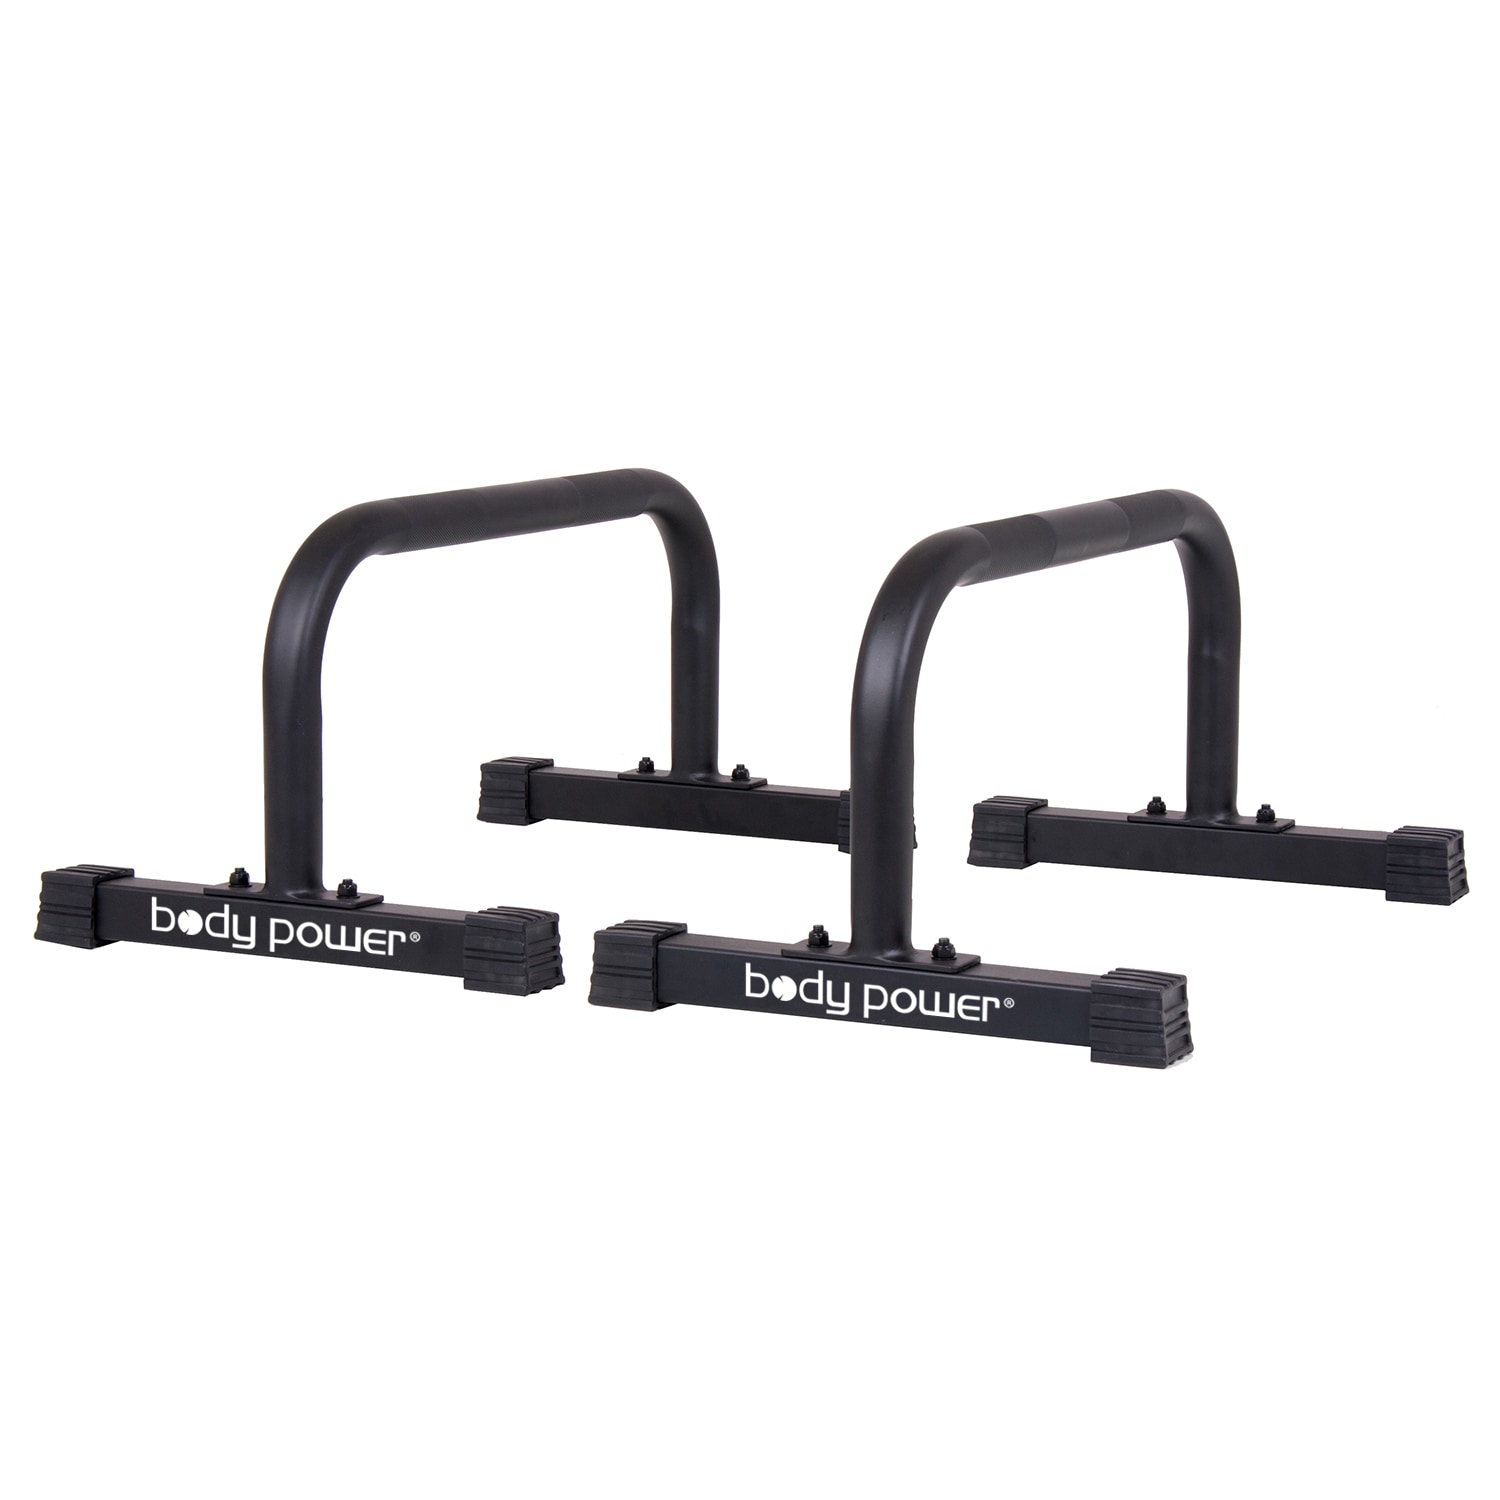 Goplus Freestanding Pull-up Bar in the Pull-Up & Push-Up Bars department at